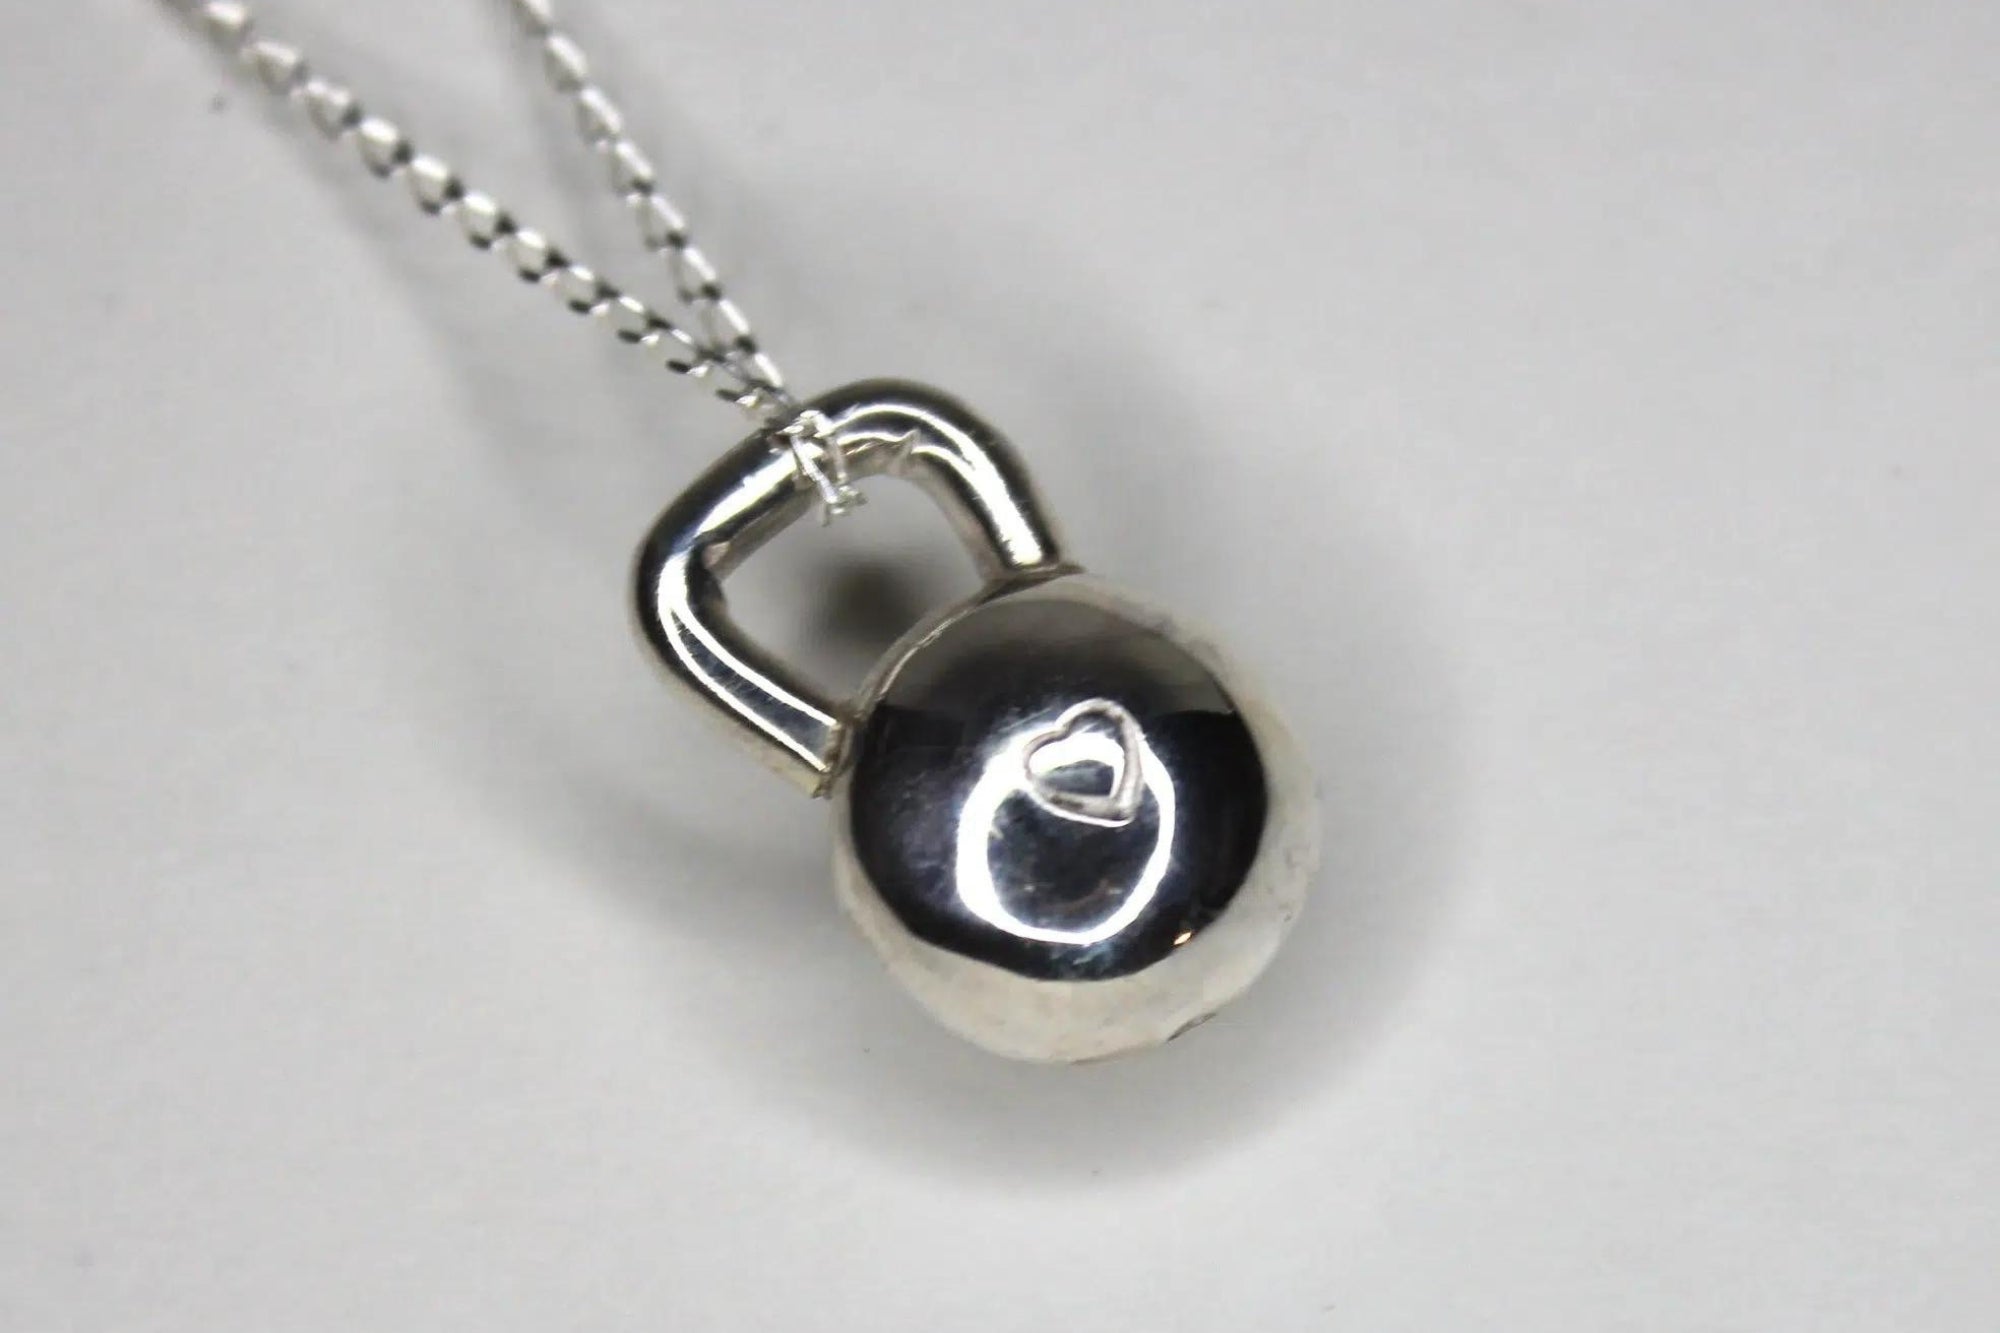 Shop Jewellery at PHITCetera.com | Halifax Sustainable Lifestyle Wear